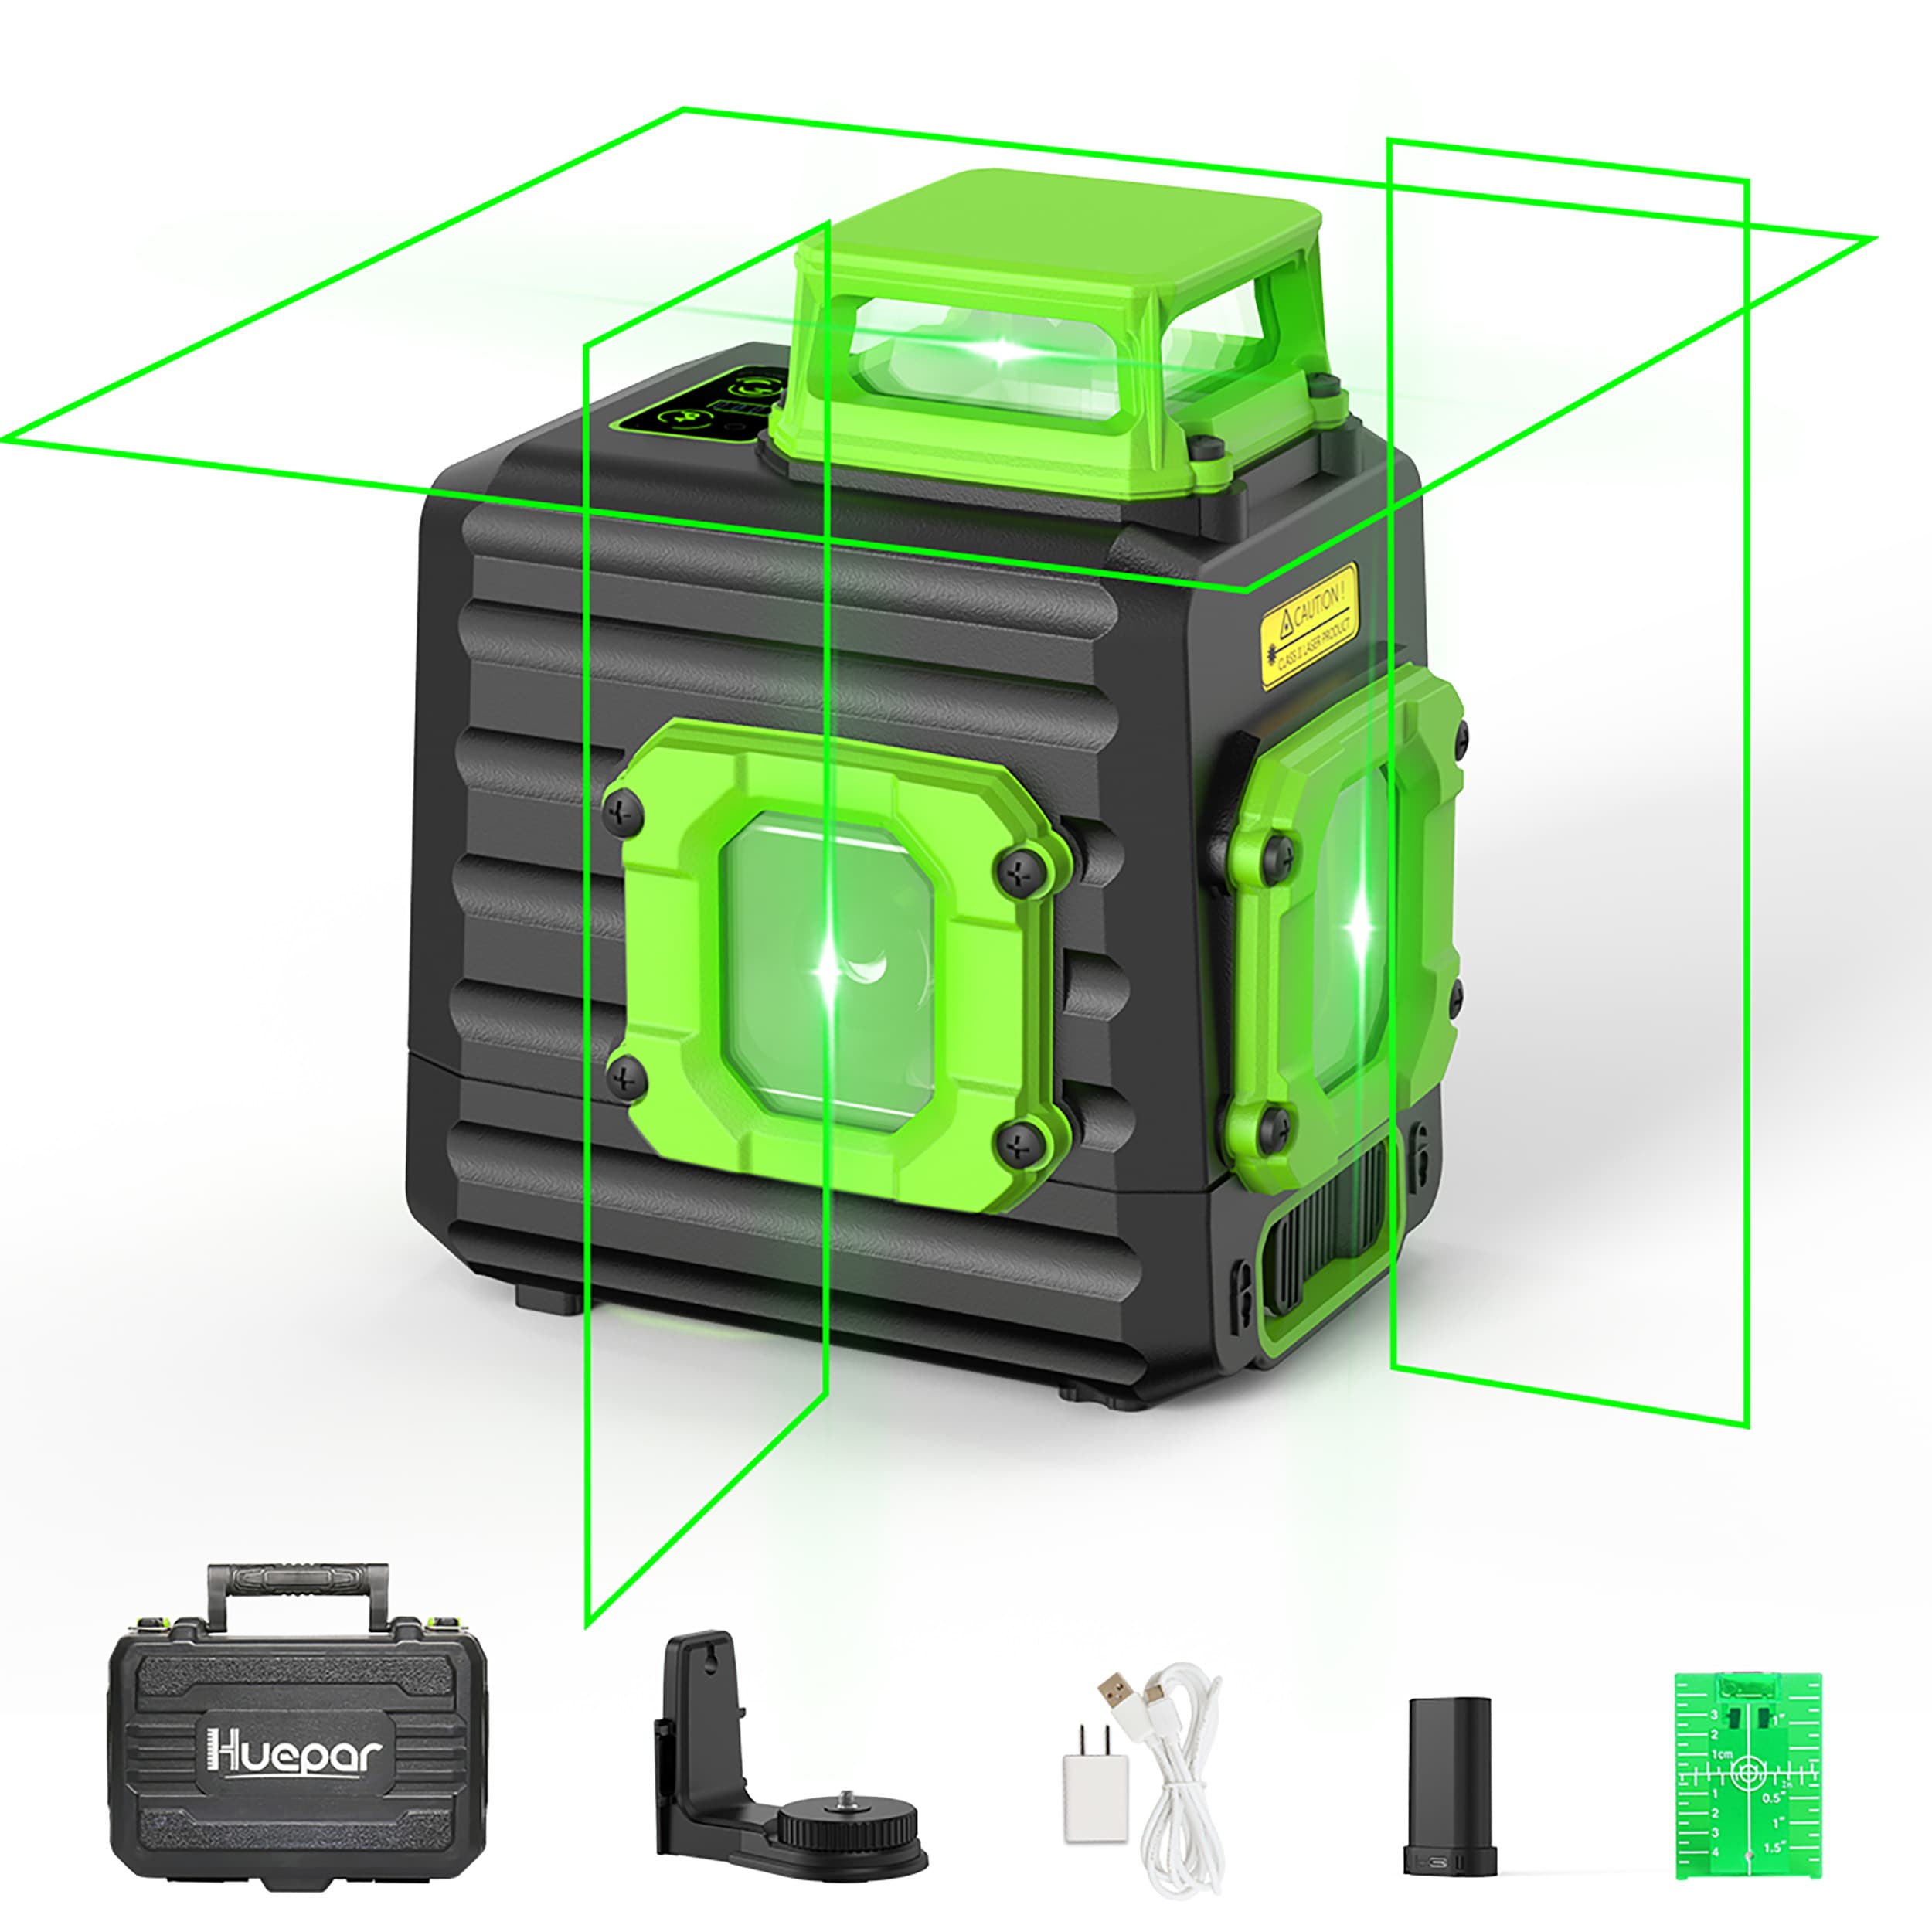 Huepar B21CG - Green 360° Horizontal and Two Vertical Lines Cross Line  Laser Level with Hard Carry Case